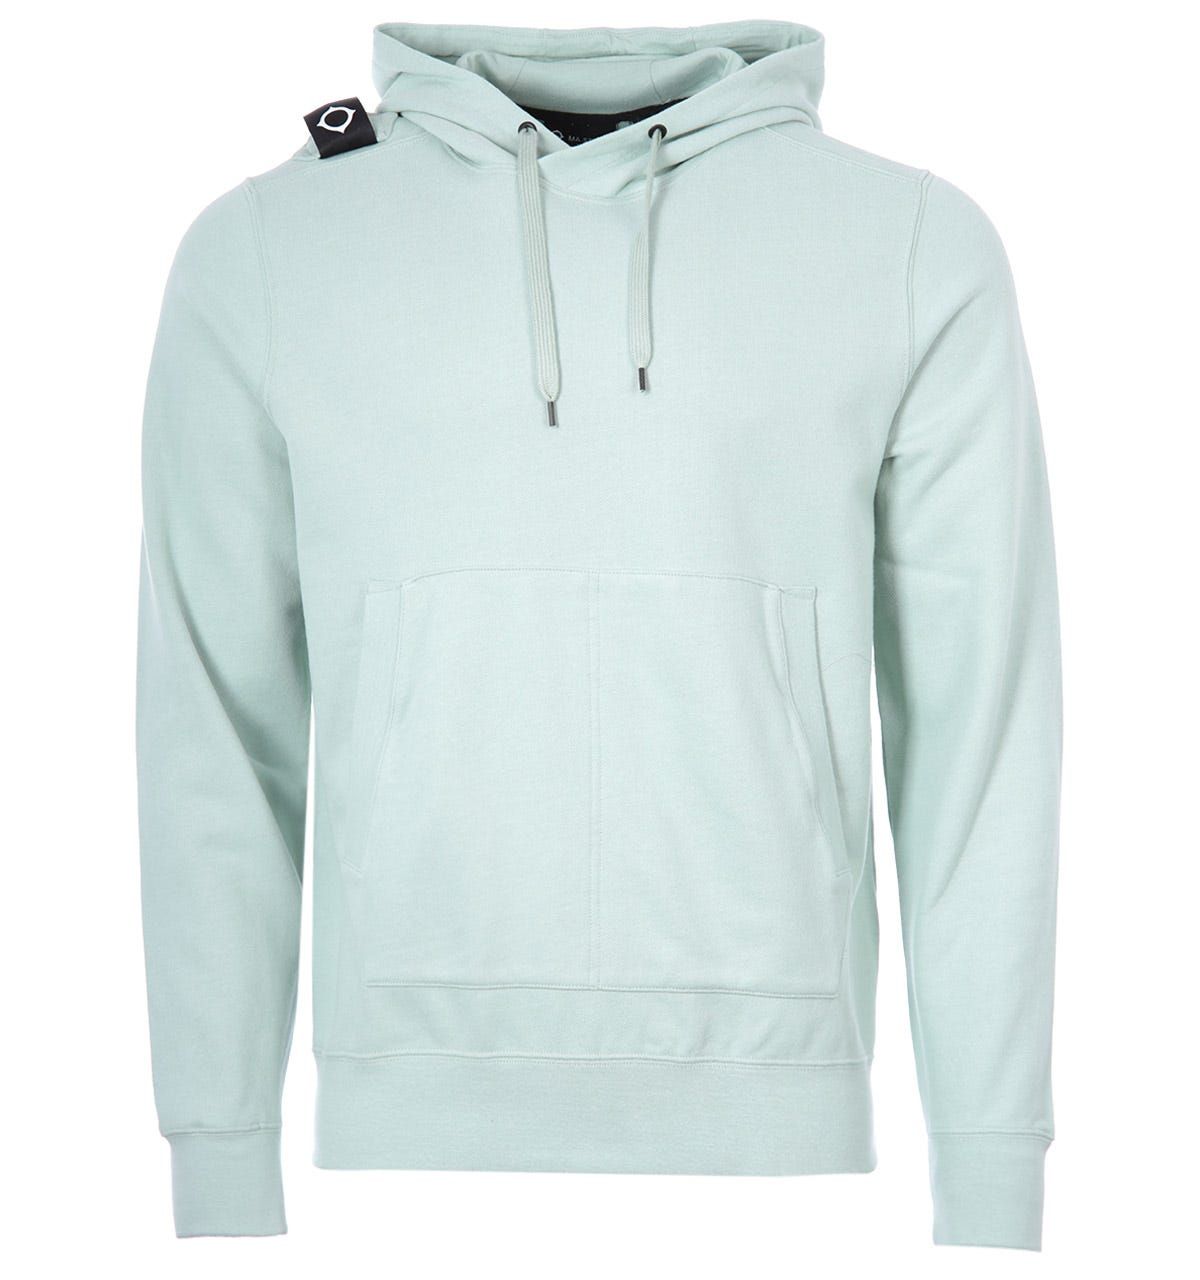 Refresh your wardrobe essentials with MA.Strum and their core hooded sweatshirt. Crafted from a diagonal weave loopback cotton, offering comfort and warmth. Inspired by sportswear featuring an adjustable drawstring hood, kangaroo pocket, ribbed trims and signature cross-back detailing. Finished with the iconic MA.Strum detachable brand ID at the right shoulder.Regular Fit, Pure Cotton Composition, Adjustable Drawstring Hood, Kangaroo Pocket, Ribbed Trims, Tonal Stitching , Detachable Brand ID, MA.Strum Branding. Fit & Style:Regular Fit, Fits True to Size. Composition & Care: 100% Cotton , Machine Wash.